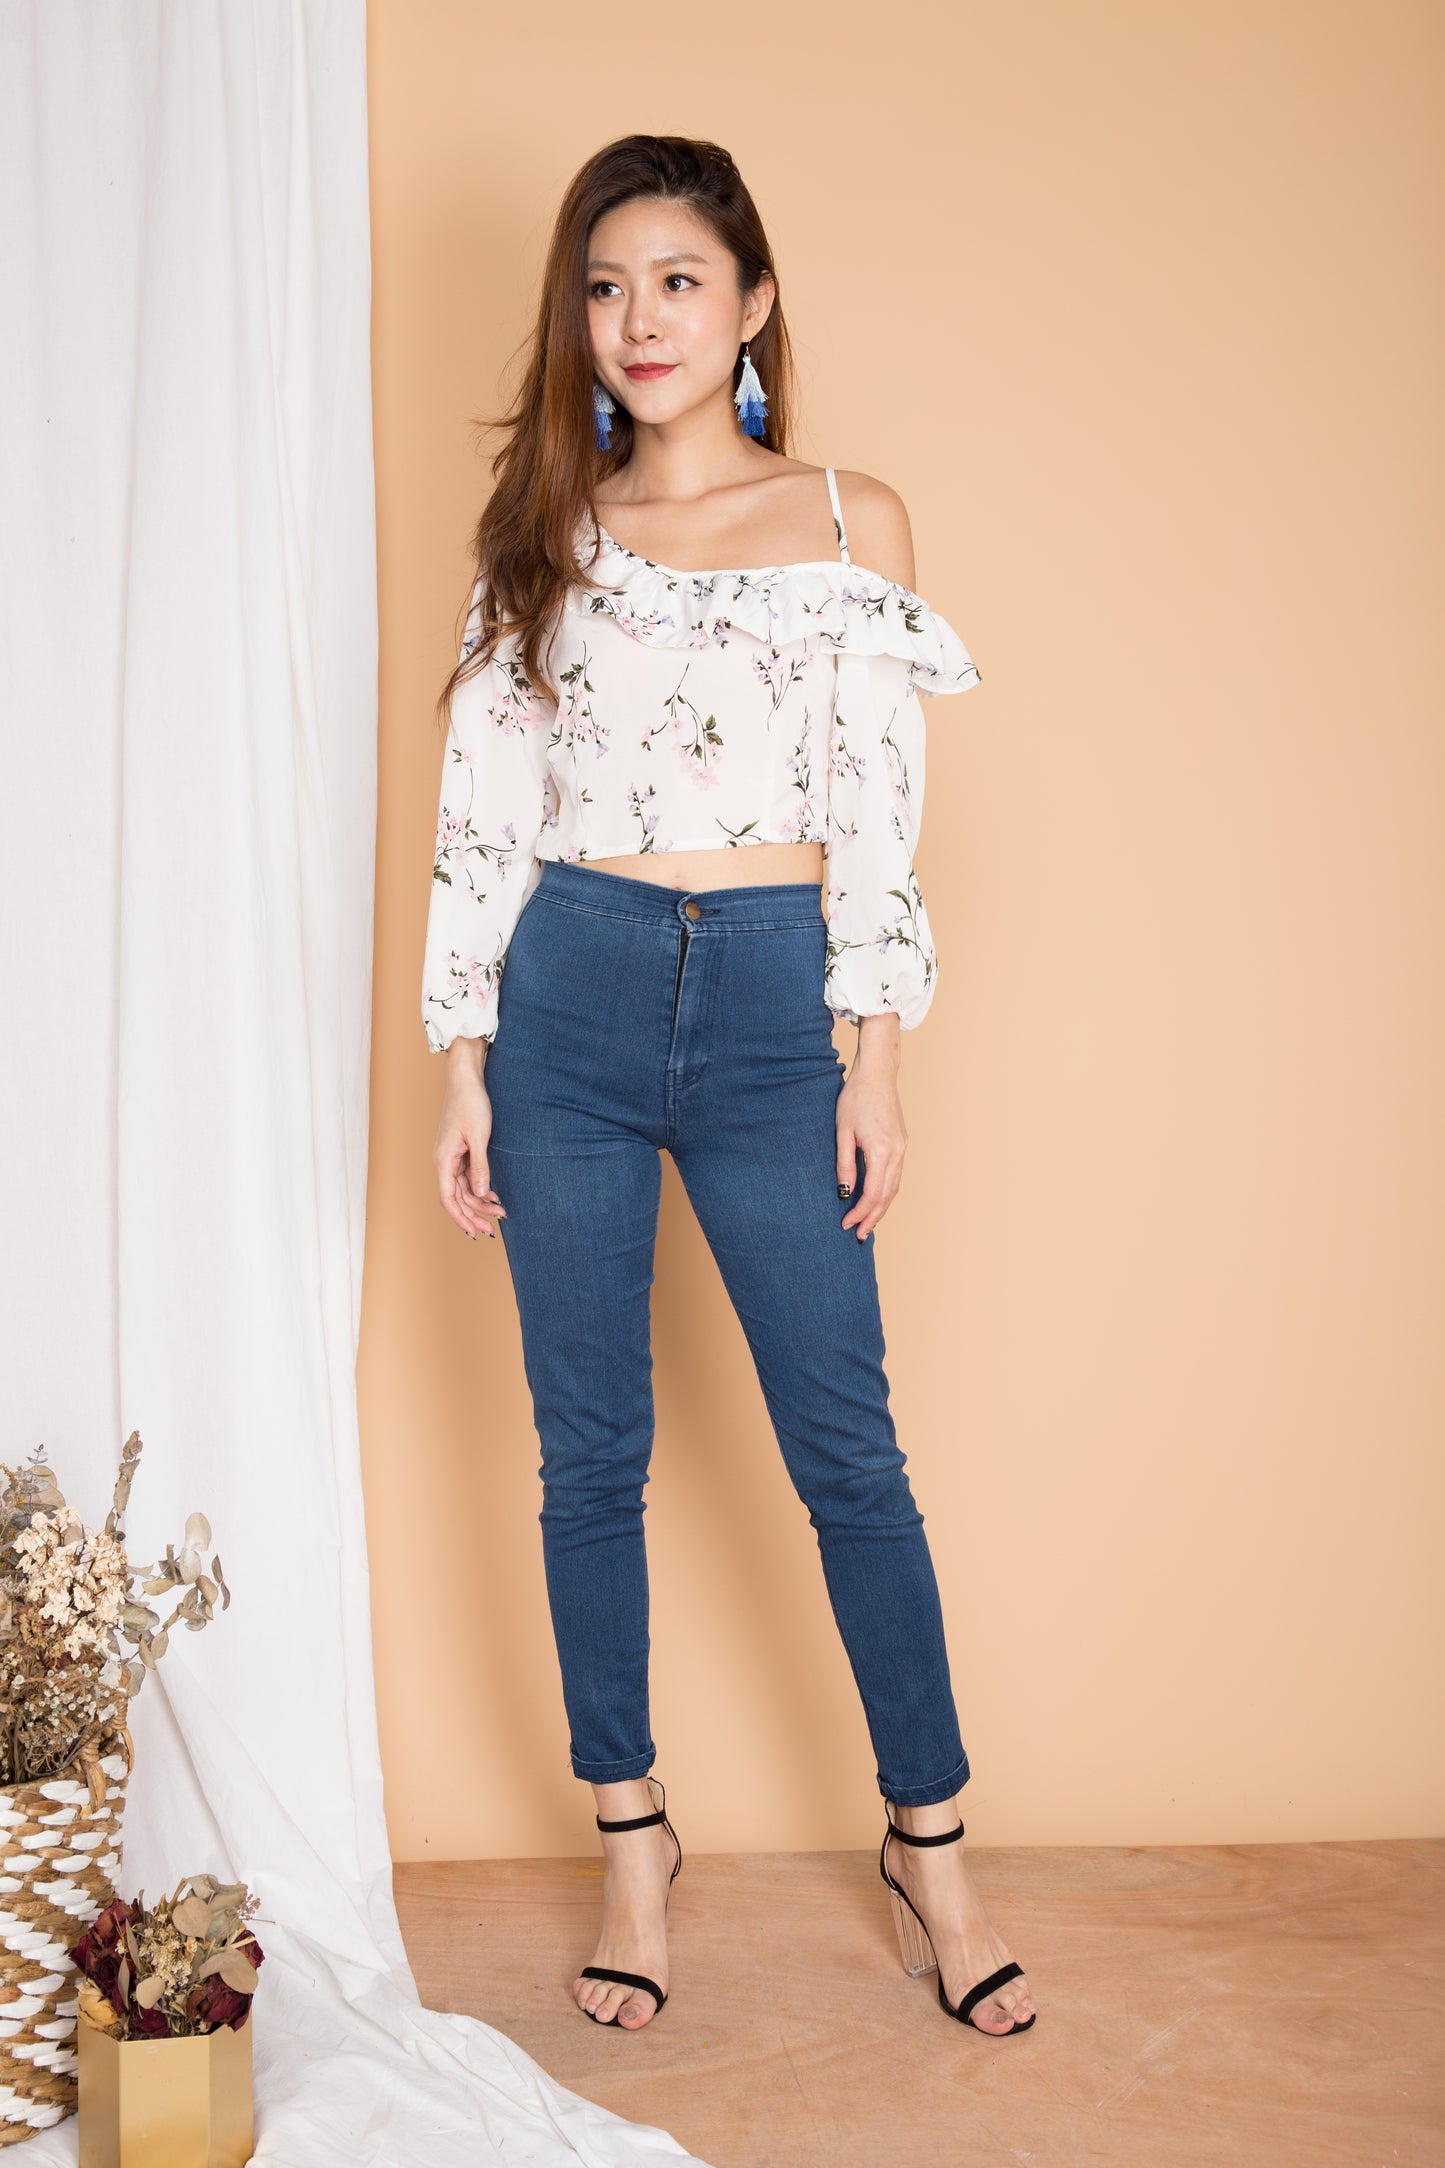 Merci Floral Toga Top in White